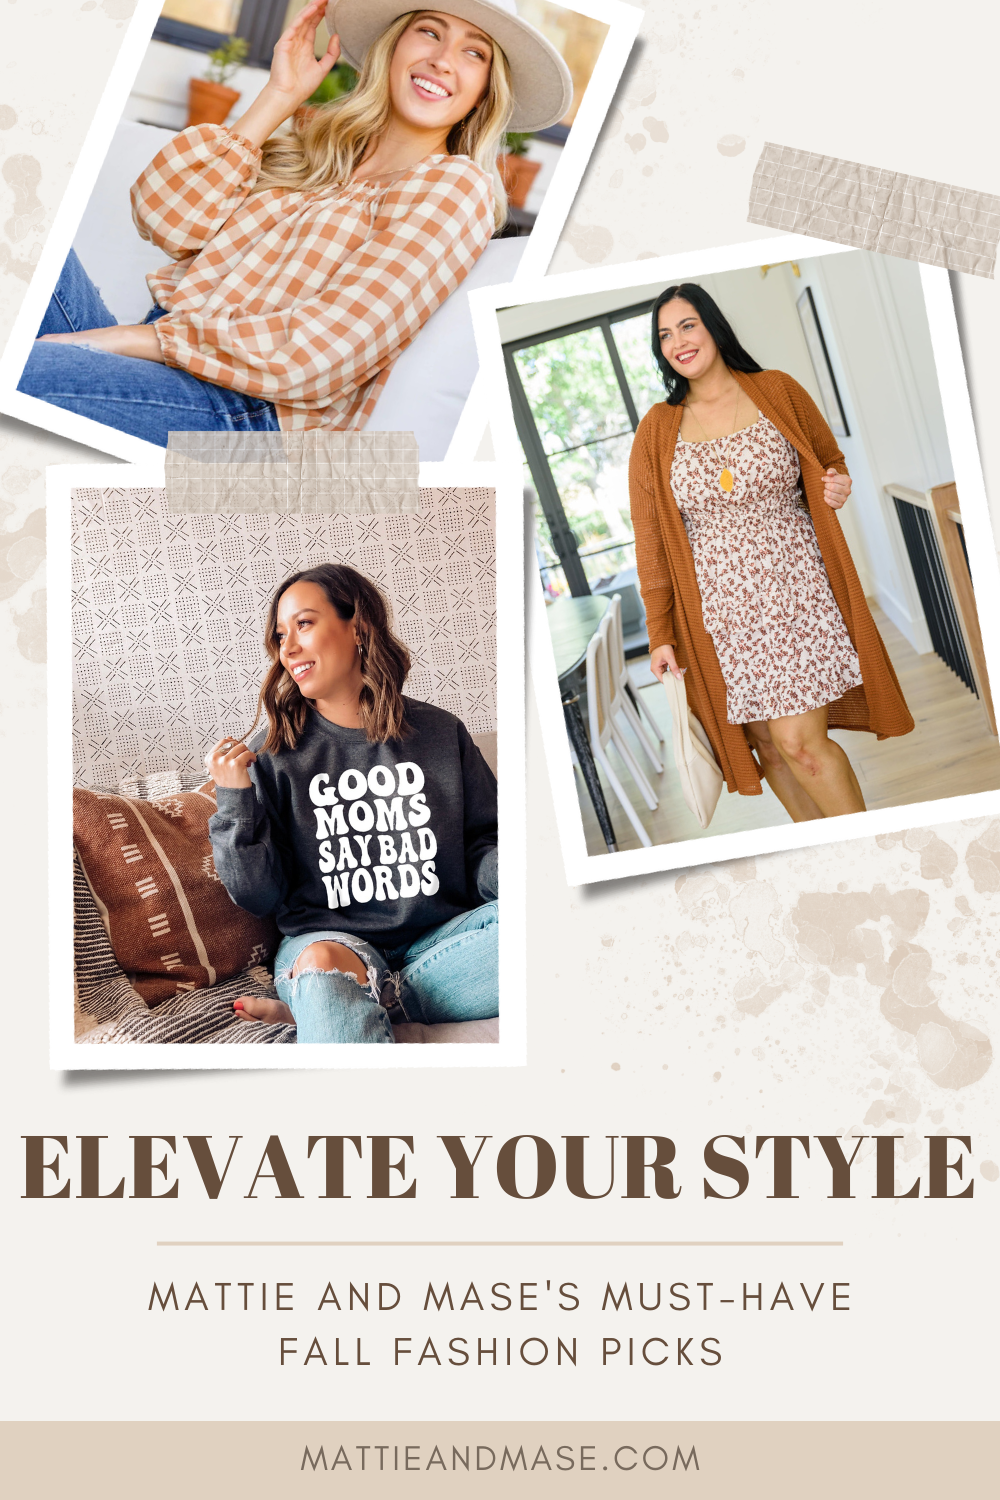 Elevate Your Style: Mattie and Mase's Must-Have Fall Fashion Picks